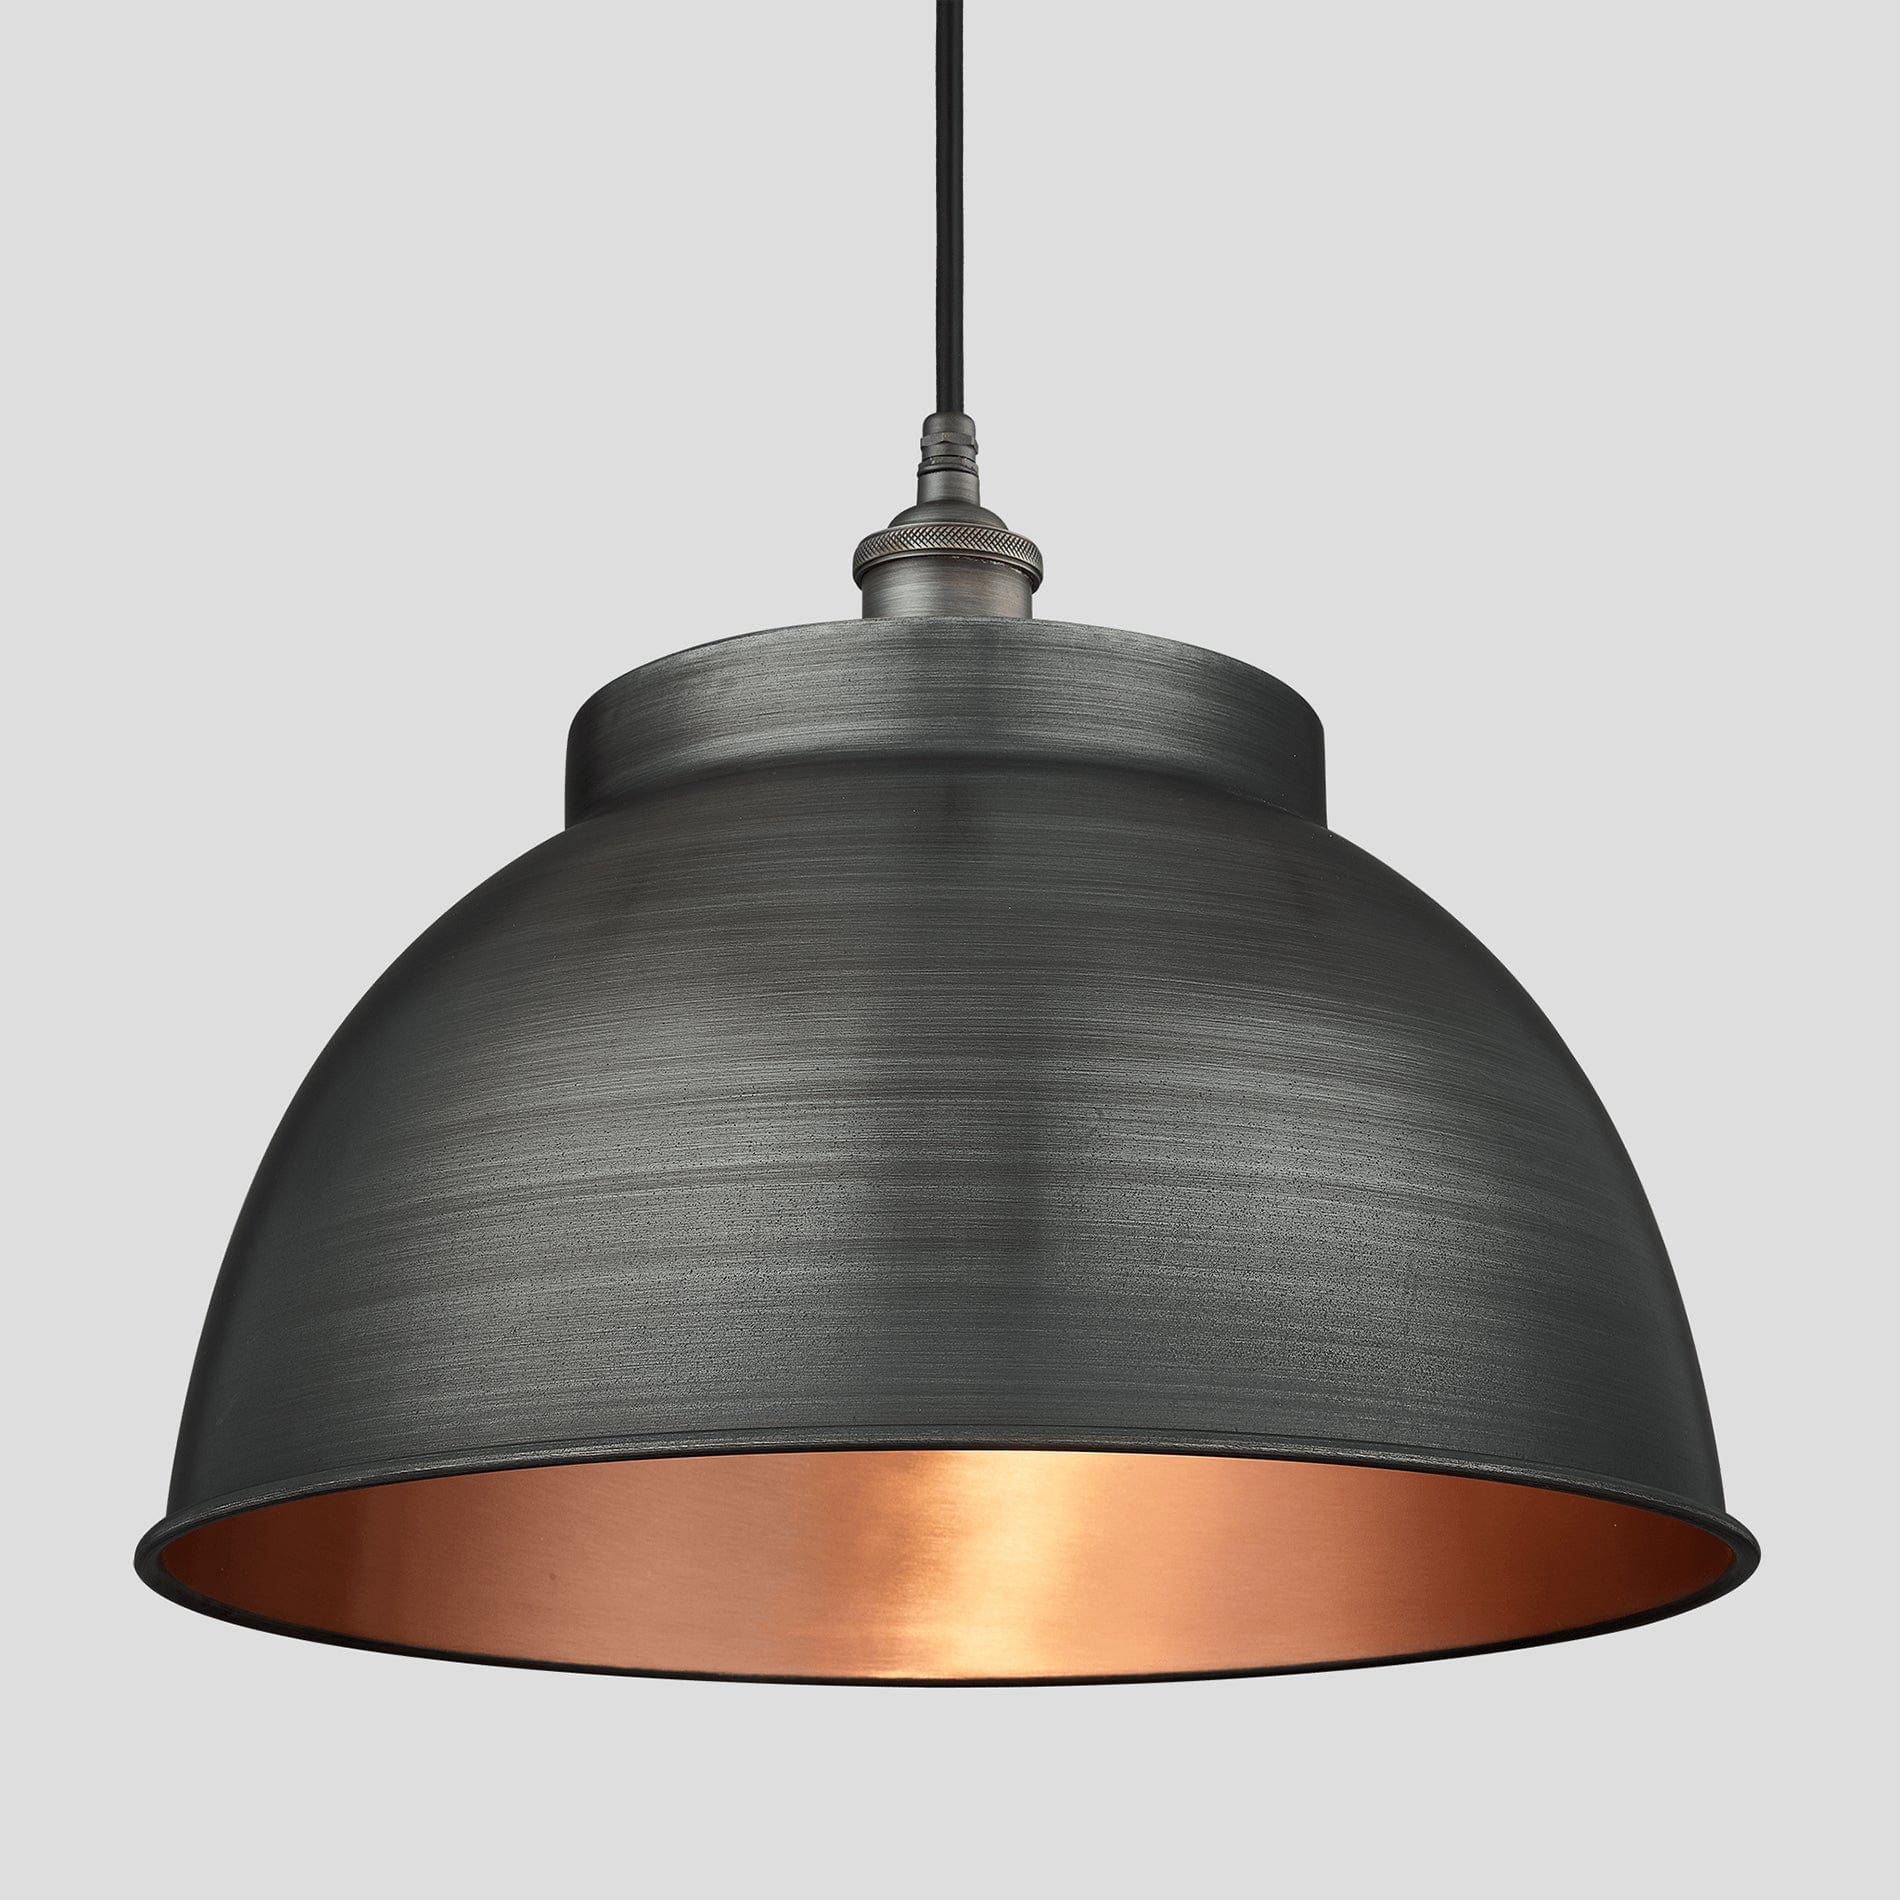 Brooklyn Outdoor & Bathroom Dome Pendant - 17 Inch - Pewter & Copper Industville BR-IP65-DP17-CP-PH